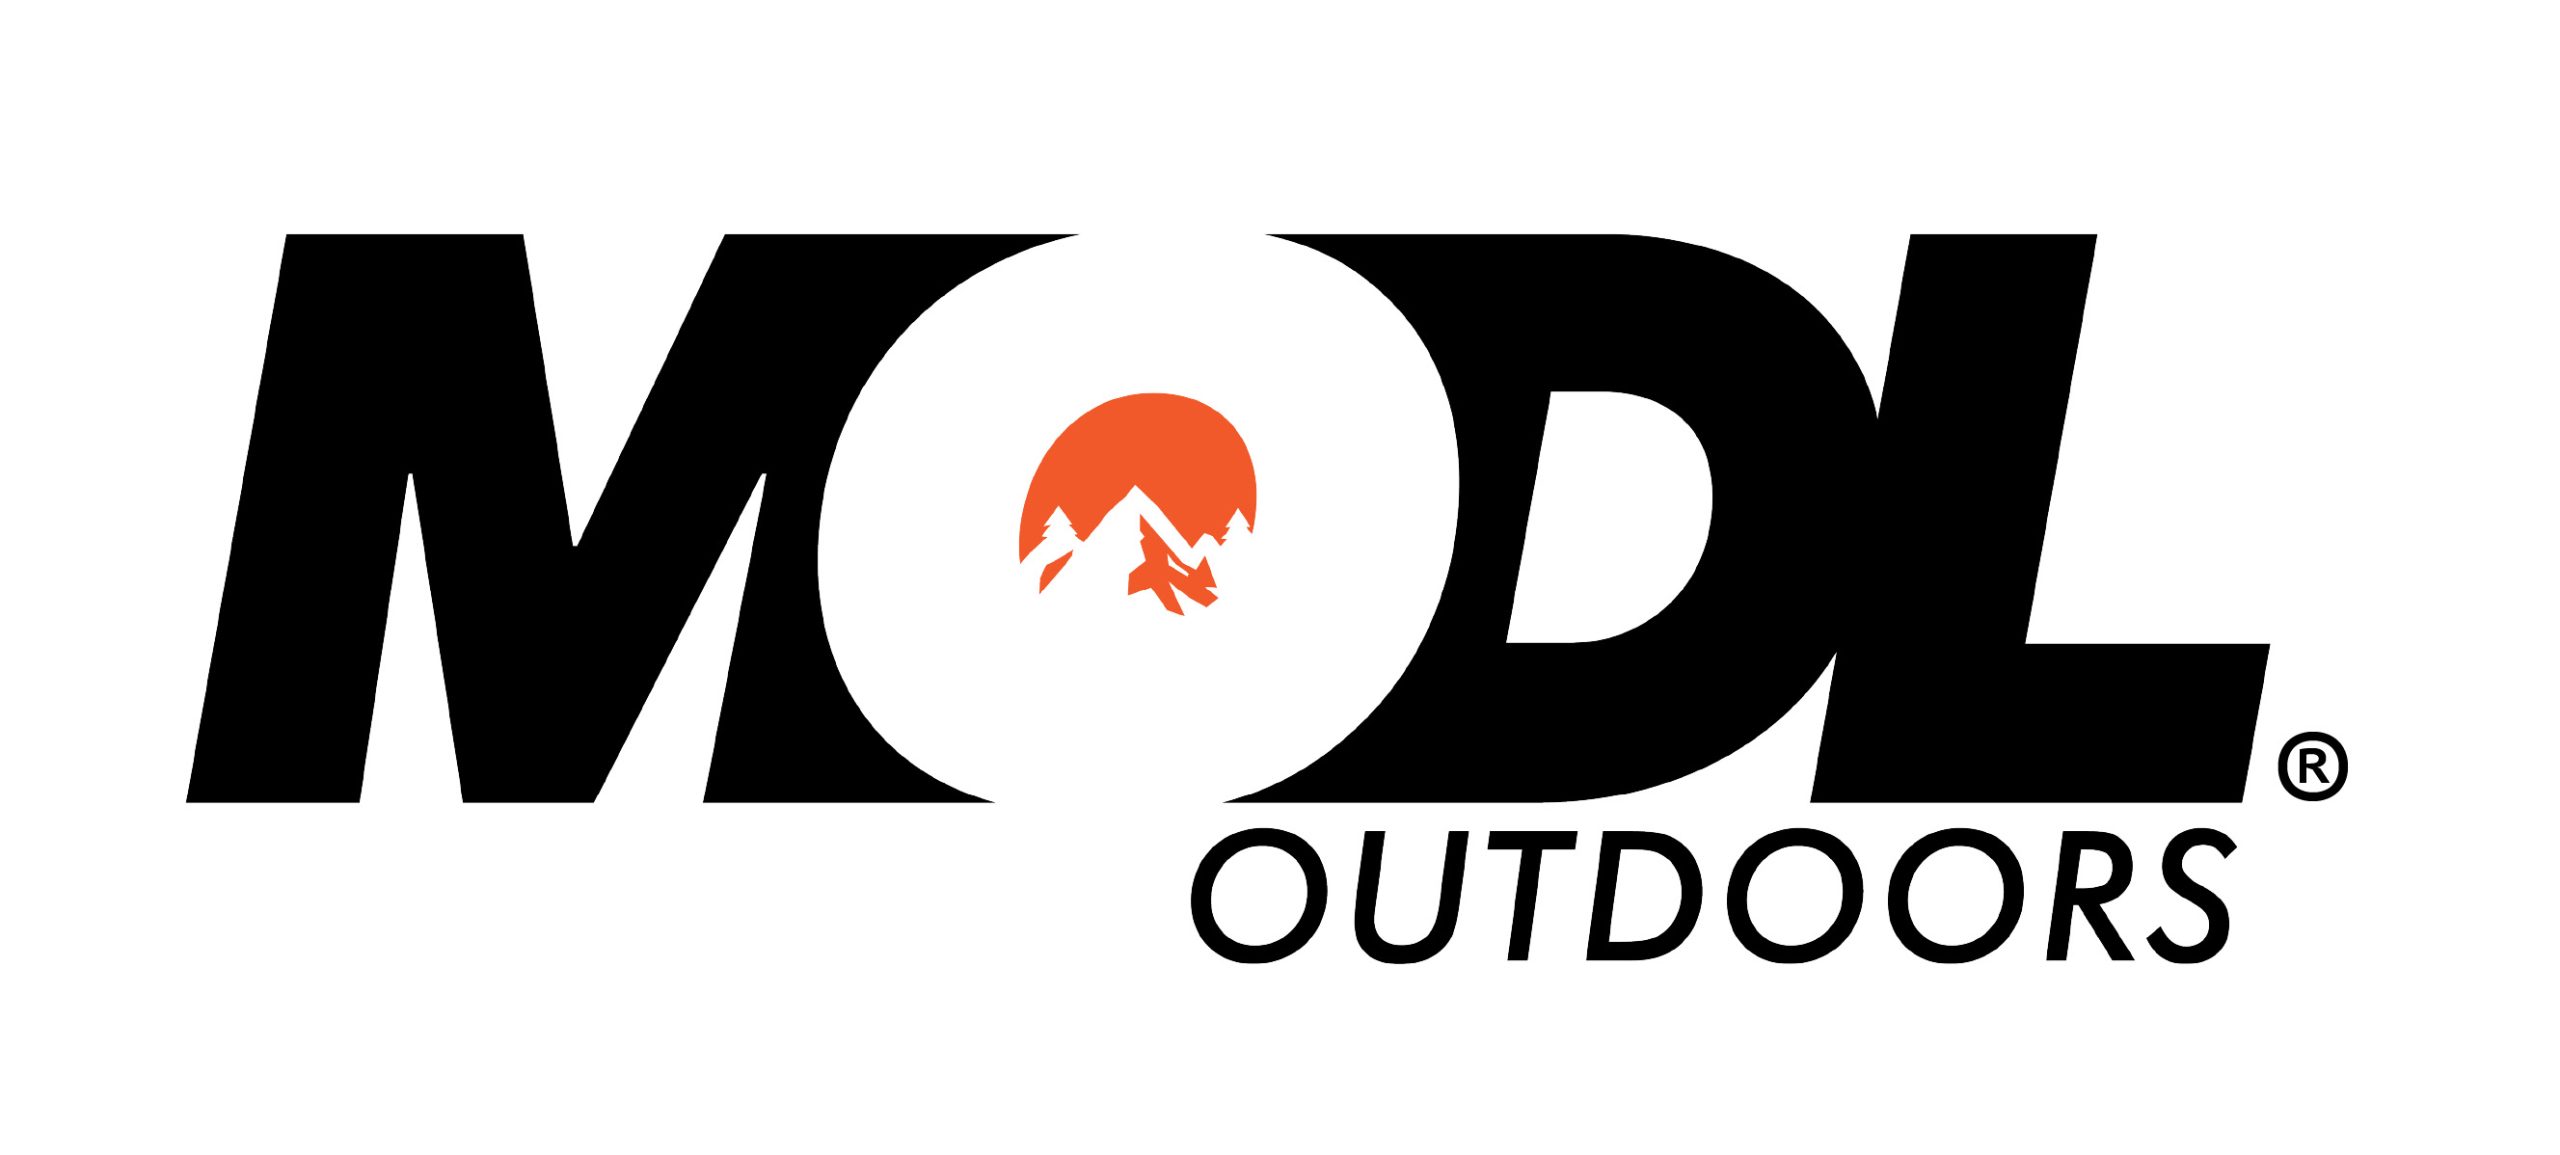 MODL Outdoors 